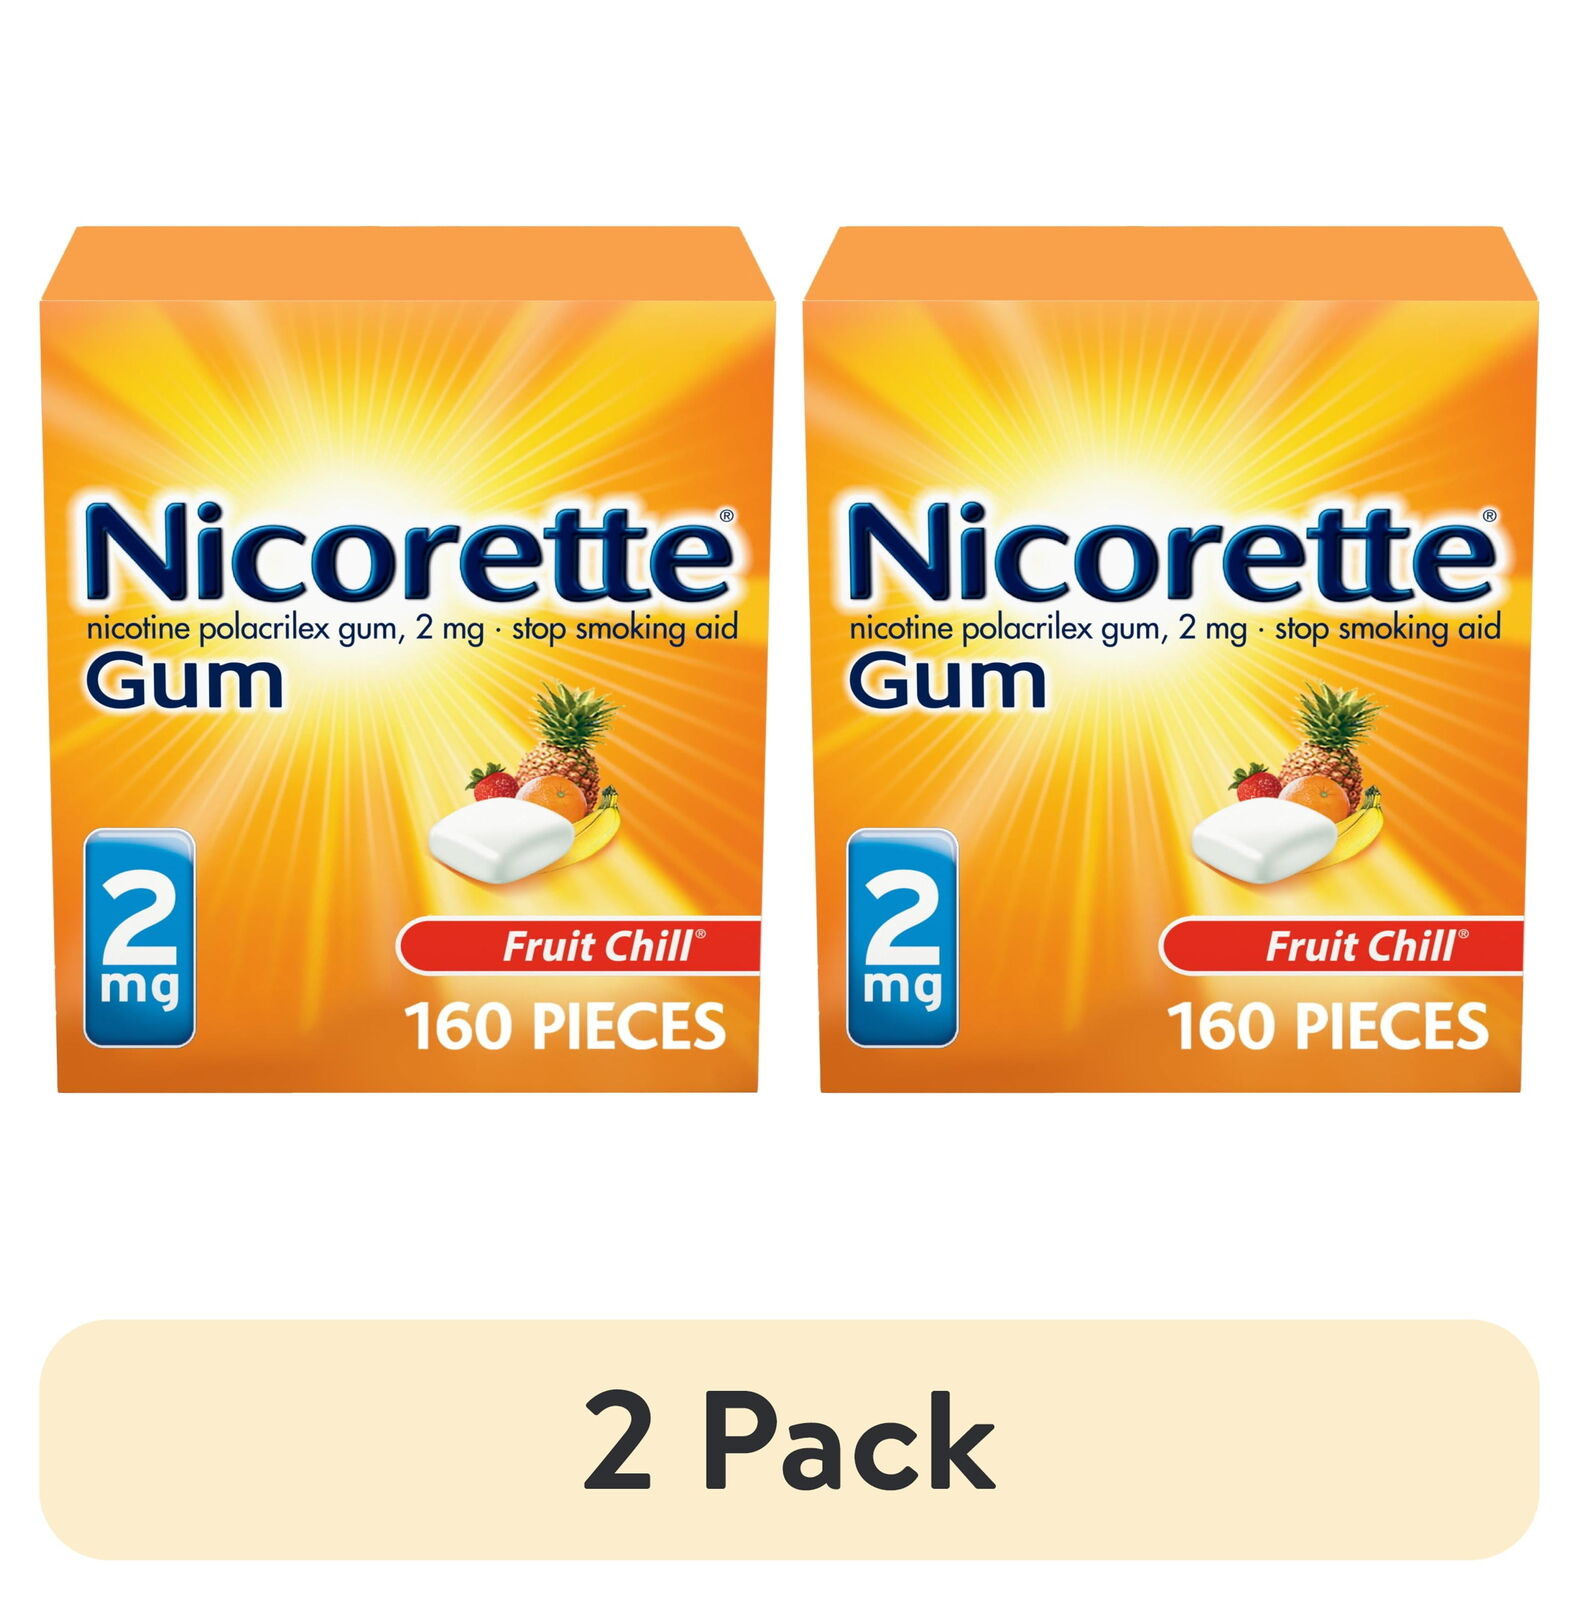 (2 pack) Nicorette Nicotine Gum, Stop Smoking Aids, 2 Mg, Fruit Chill, 160 Count